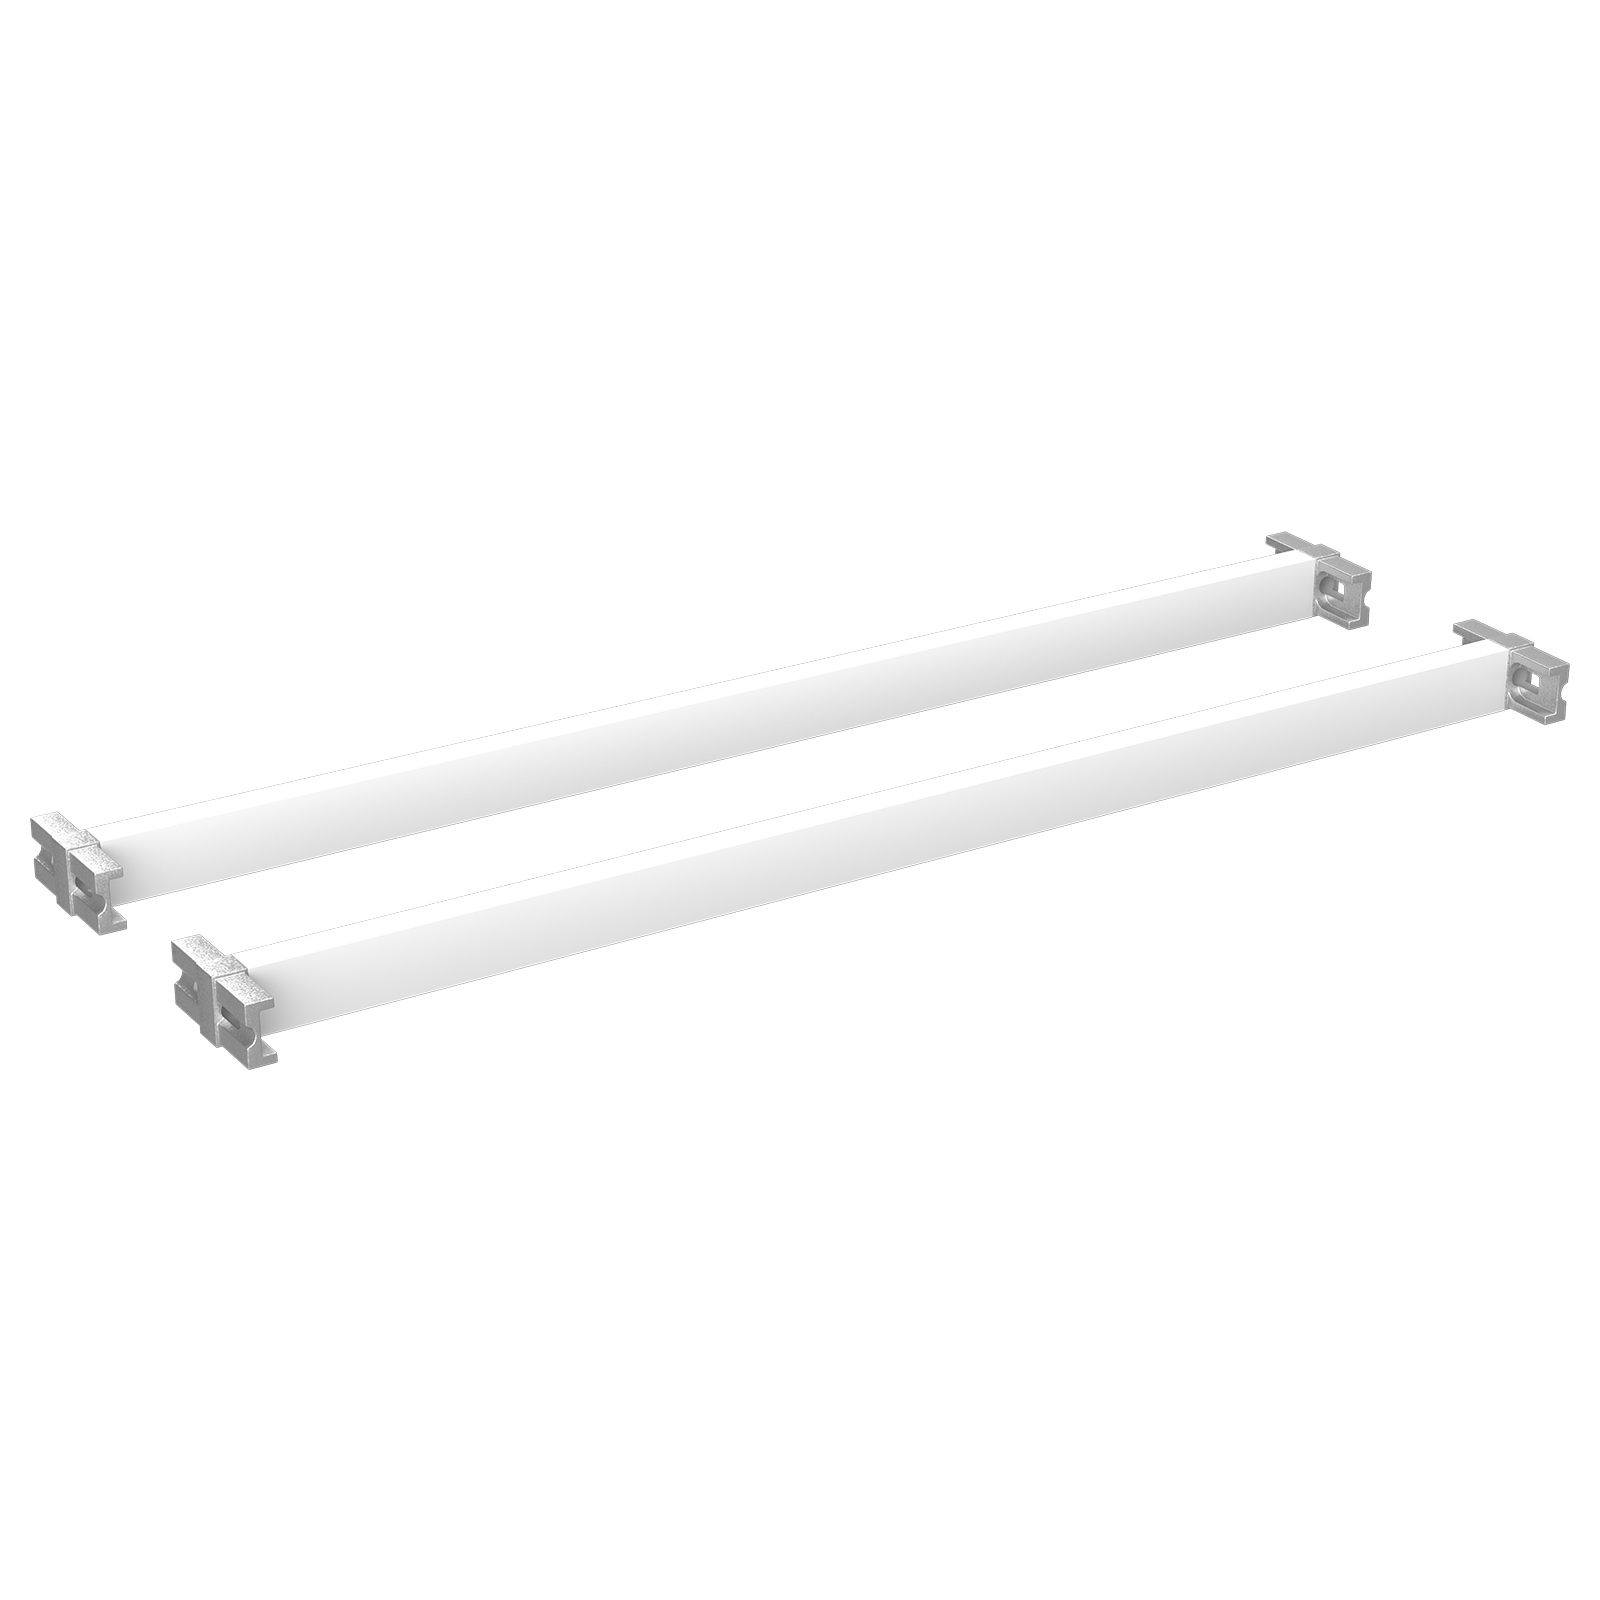 Home Solutions 435mm Cross Bars & T-Connector White